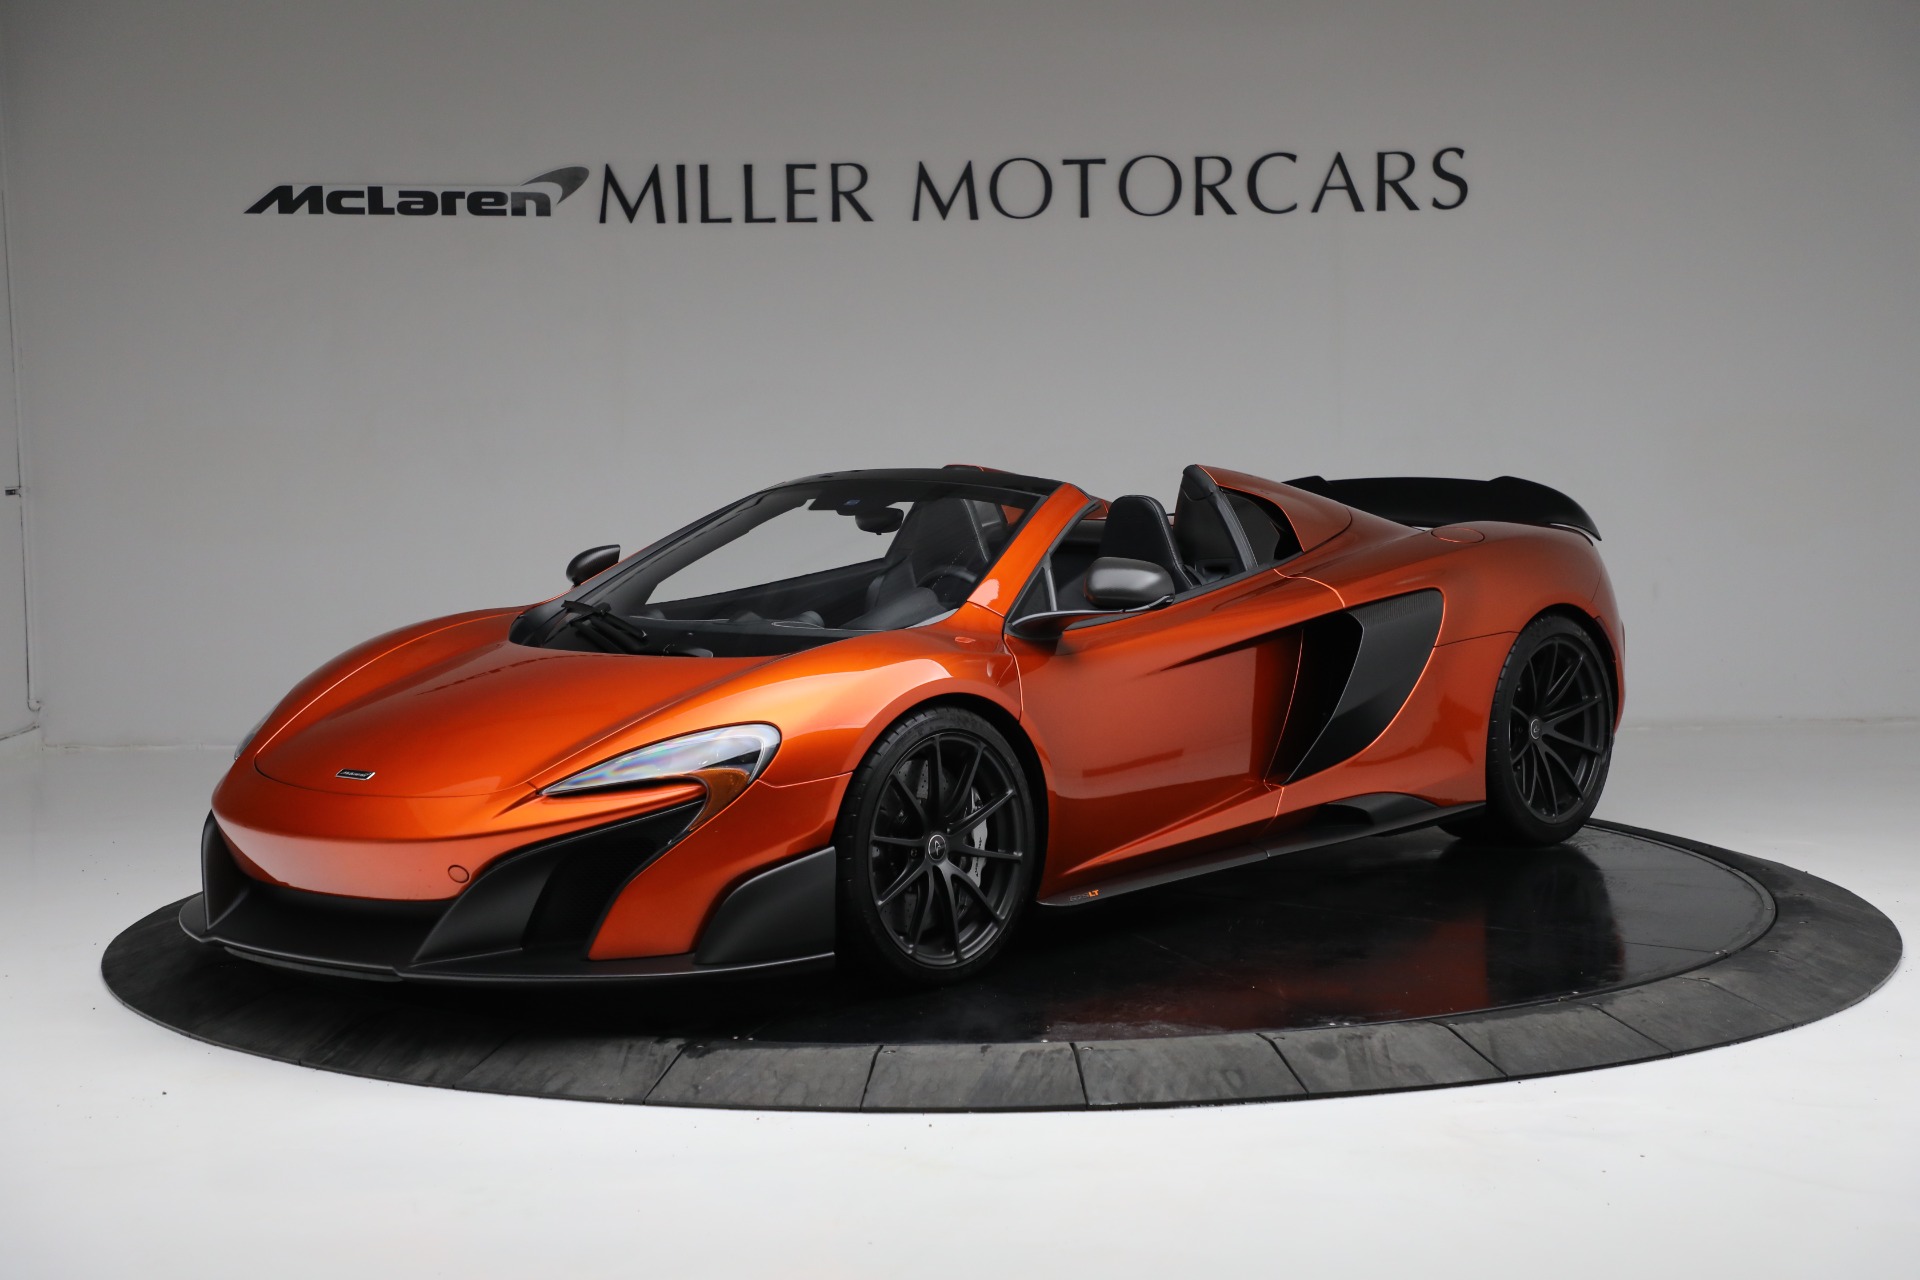 Used 2016 McLaren 675LT Spider for sale $299,900 at Pagani of Greenwich in Greenwich CT 06830 1